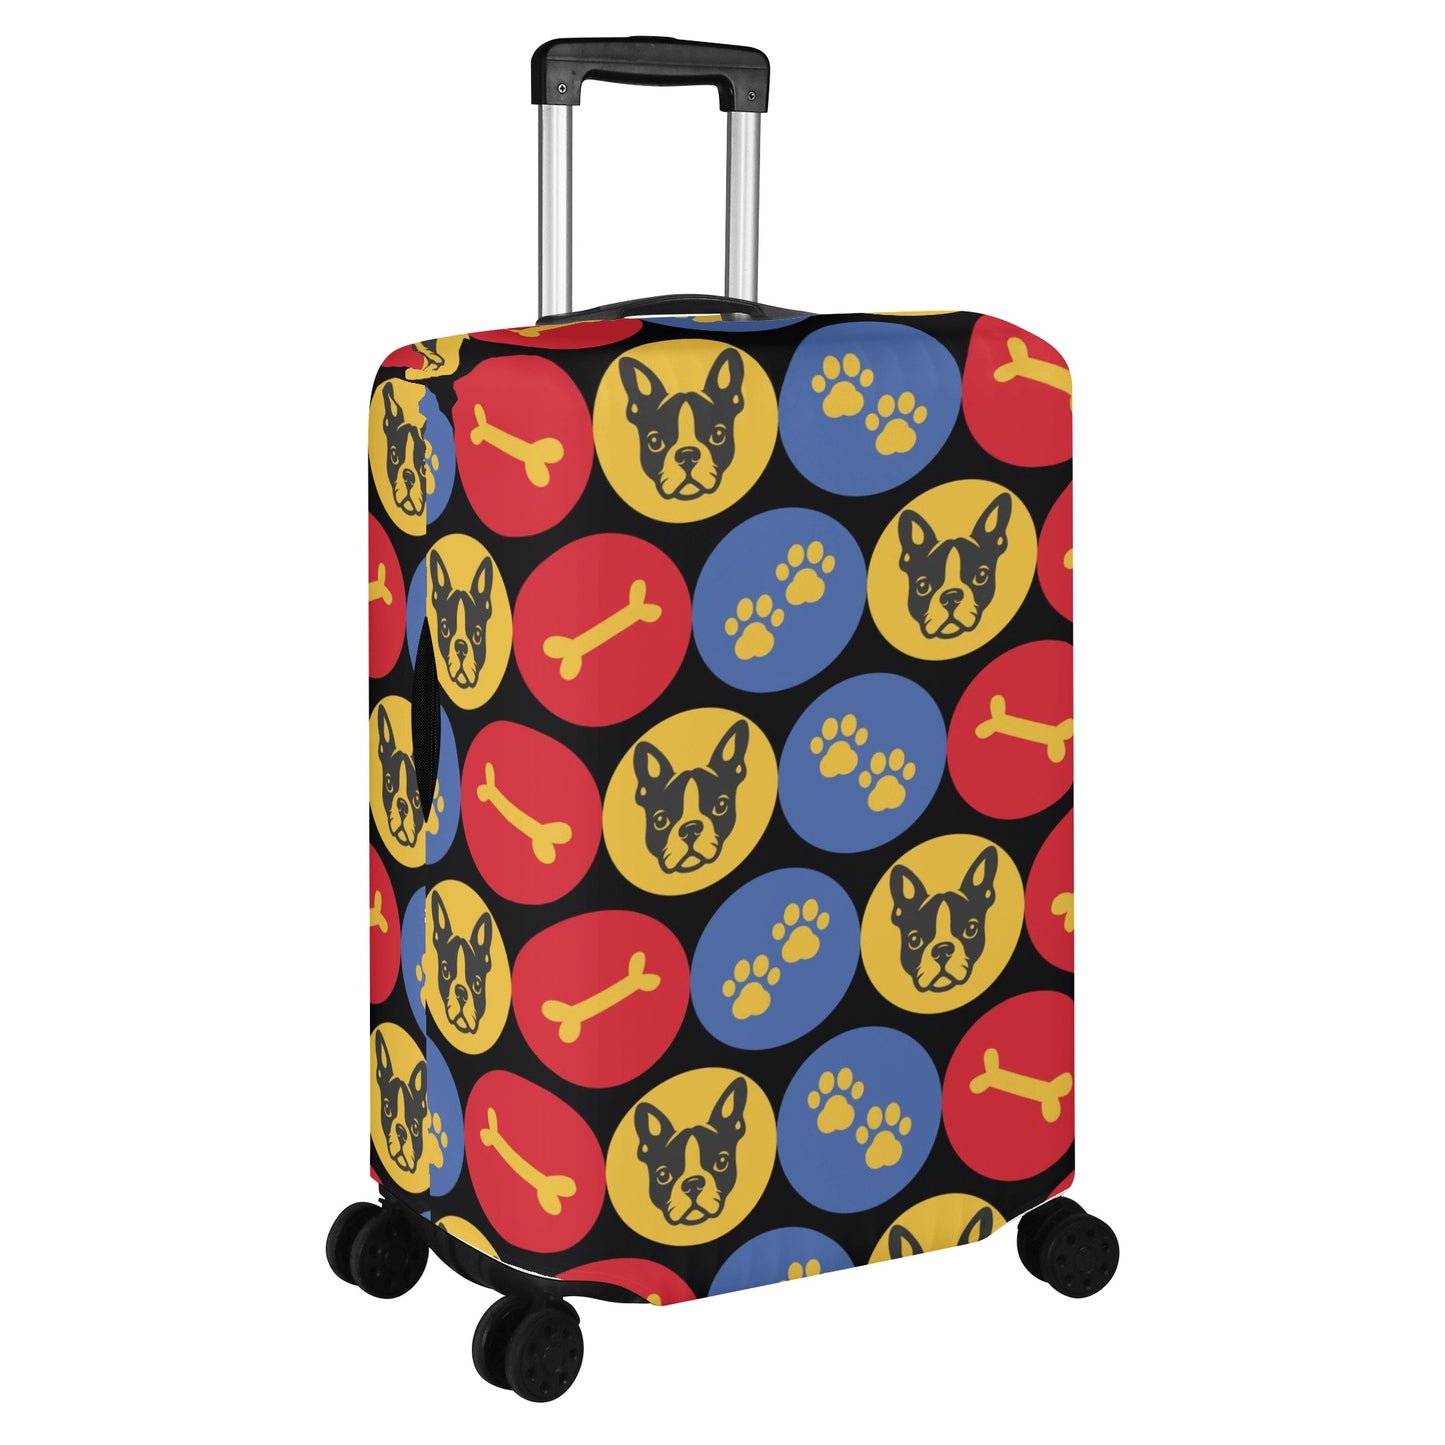 Tyson - Luggage Cover for Boston Terrier lovers